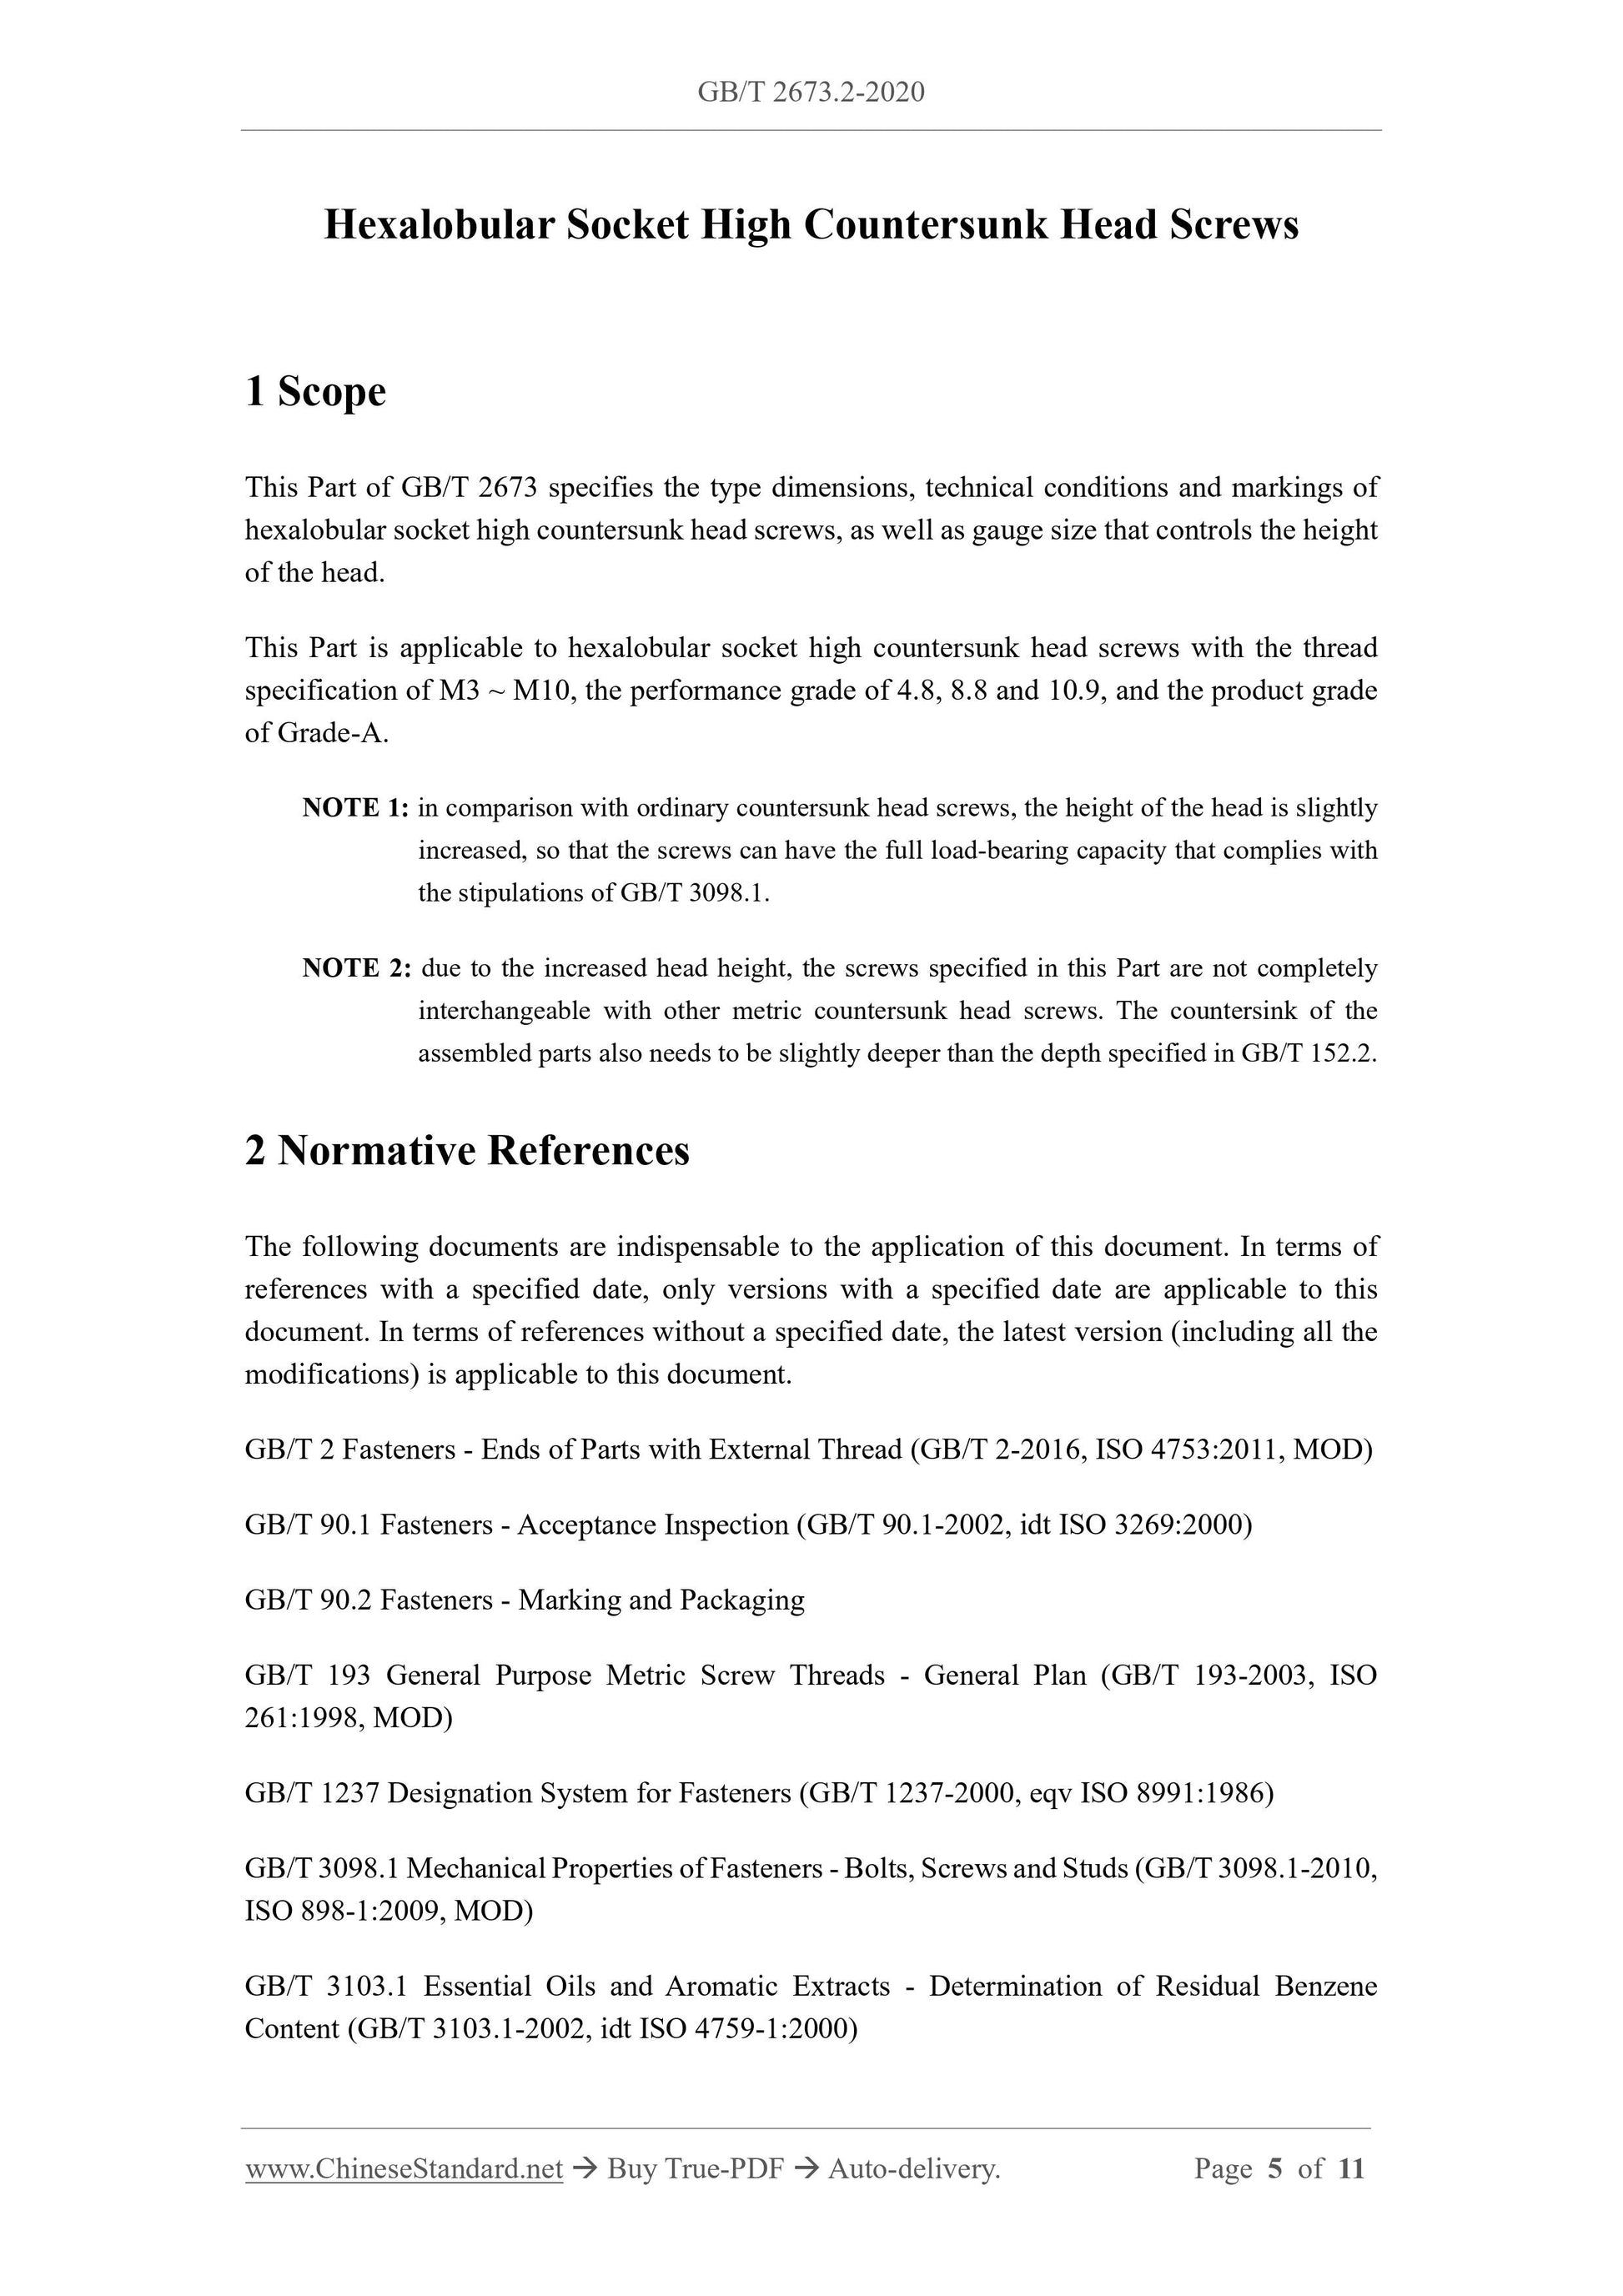 GB/T 2673.2-2020 Page 4